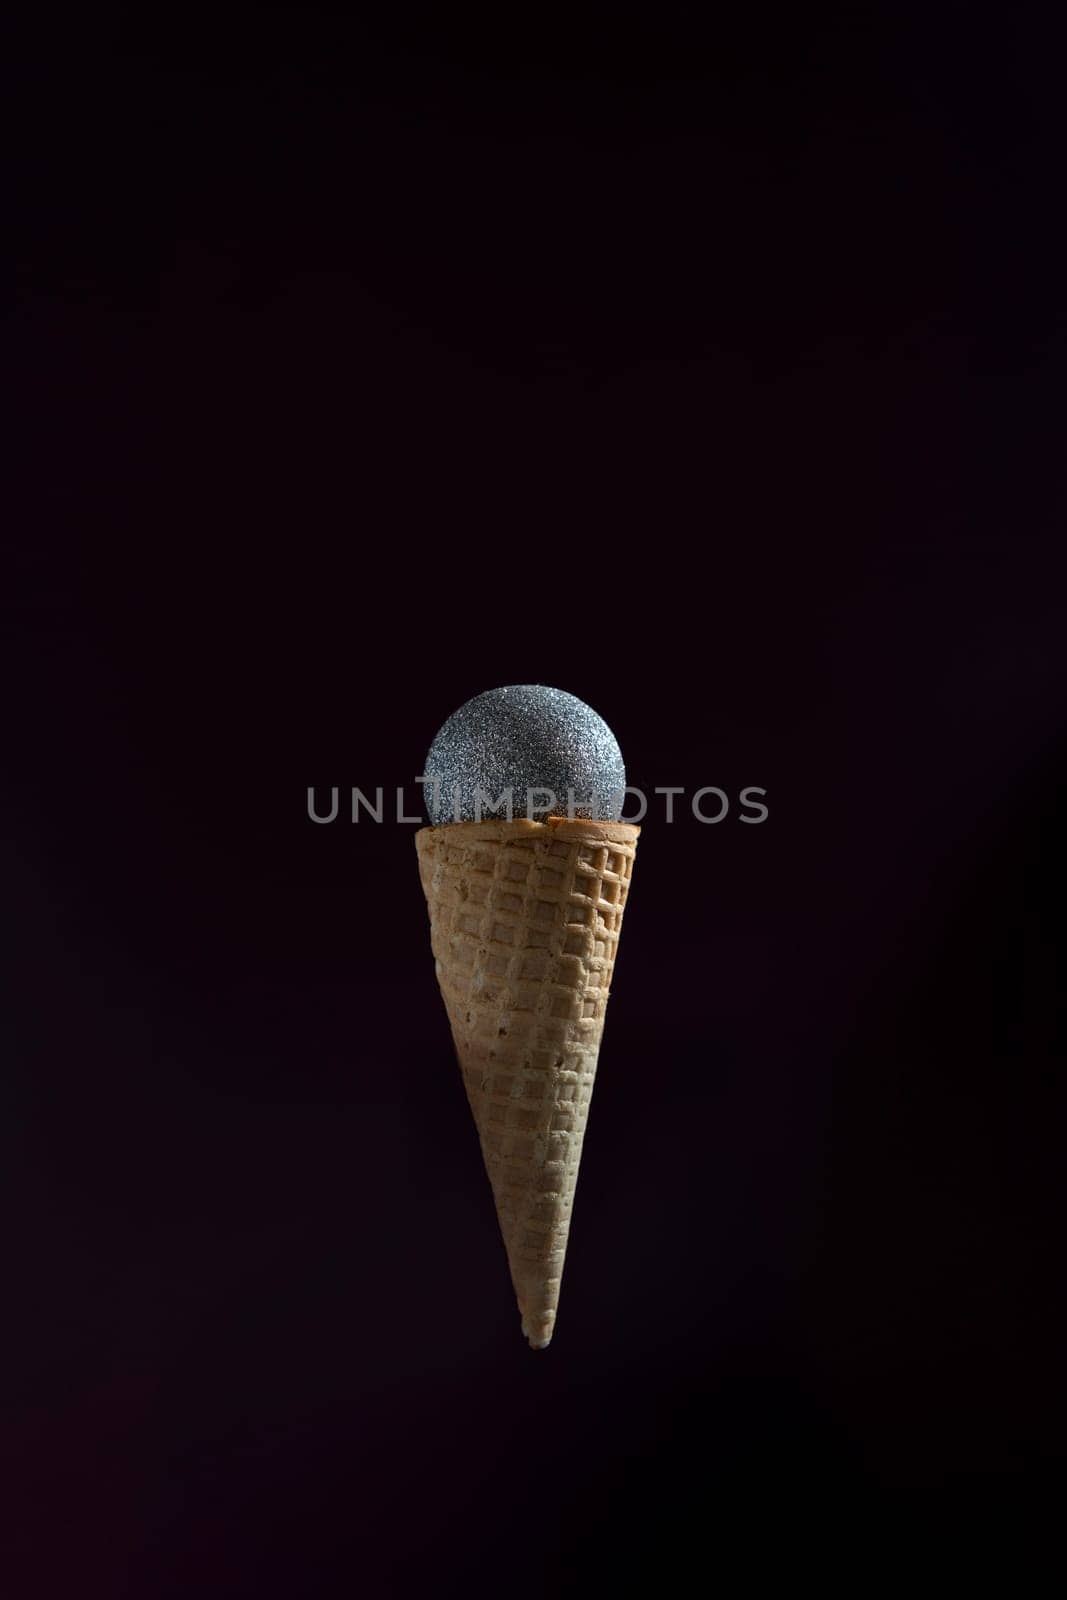 A microphone is placed inside of an ice cream cone. The cone is upside down and the microphone is suspended in the air